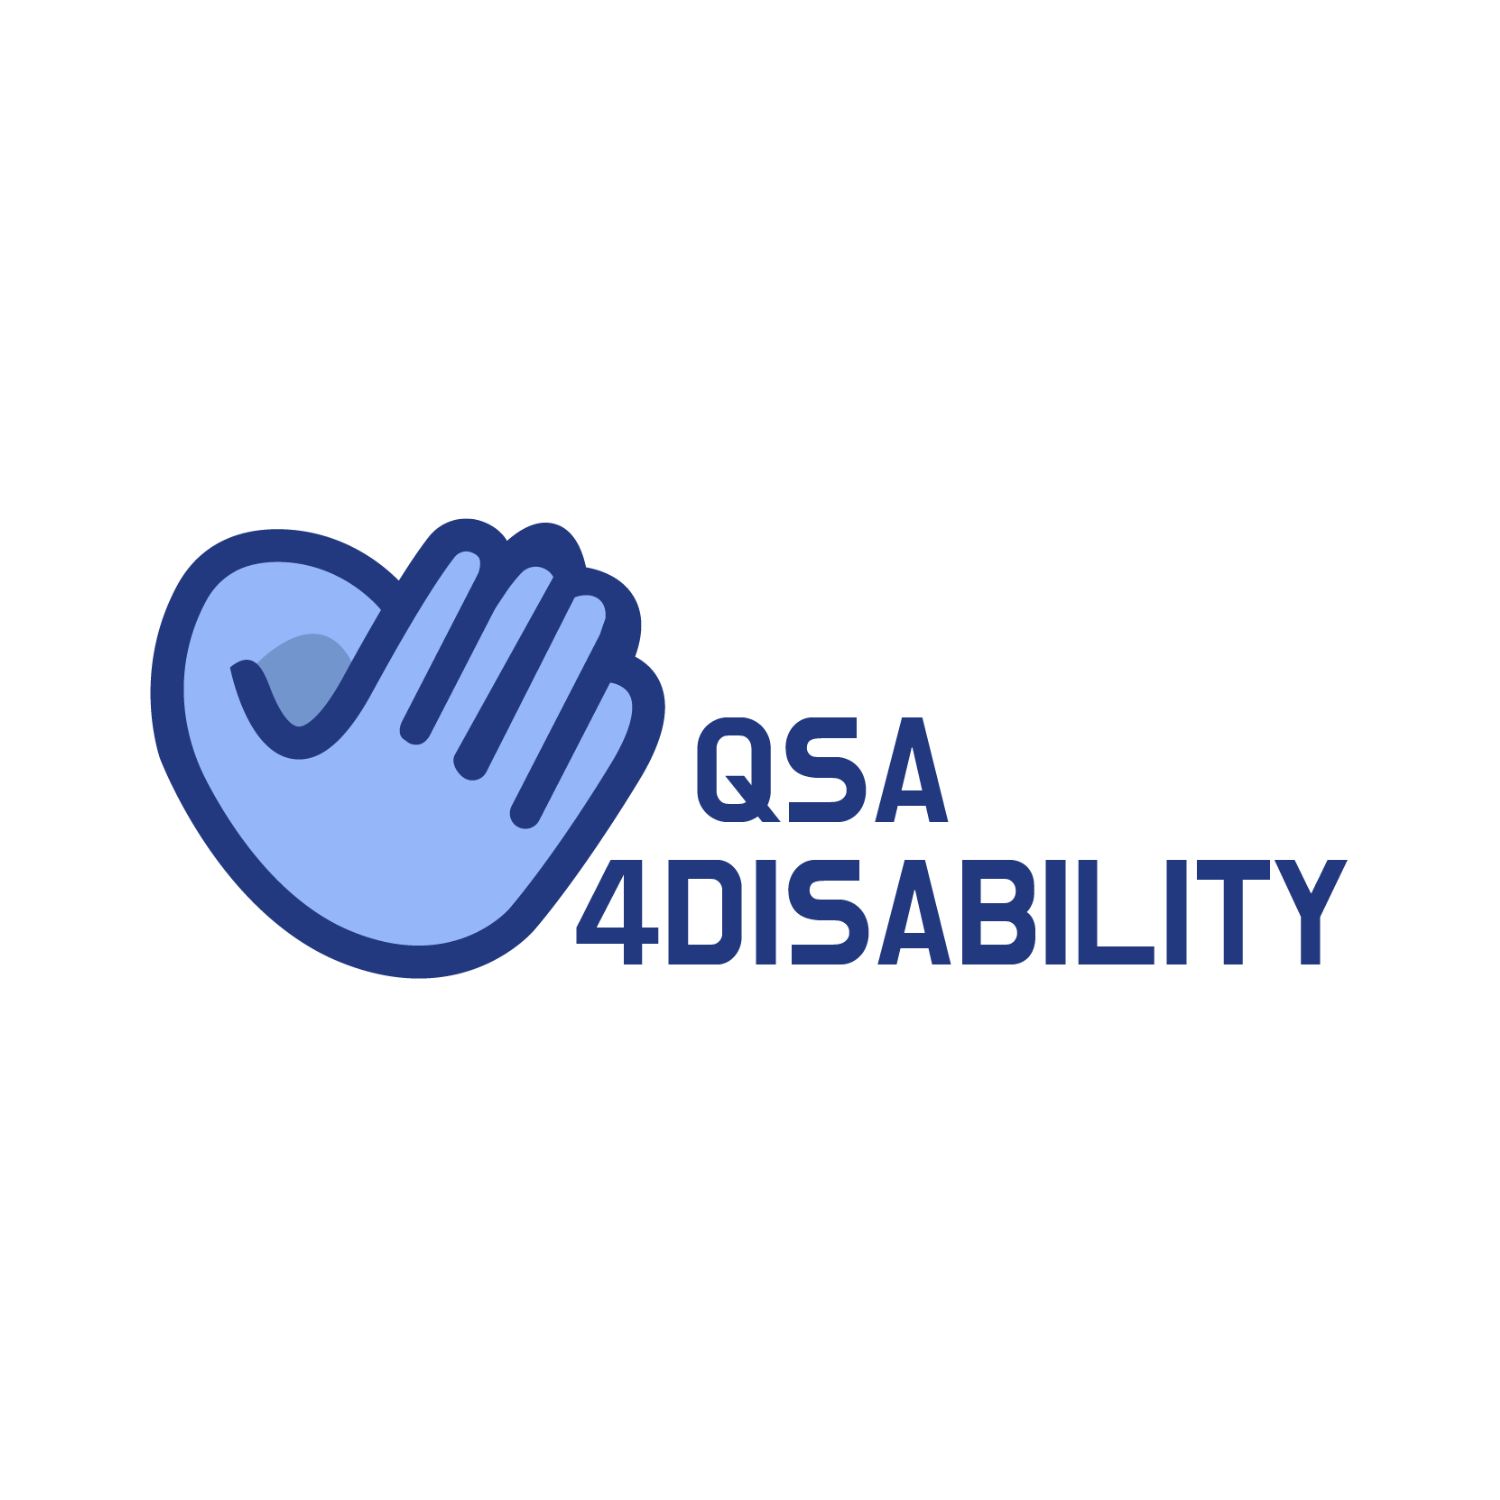 QSA4Disability - Quality Standard for Distance Apprenticeship 4 Disability